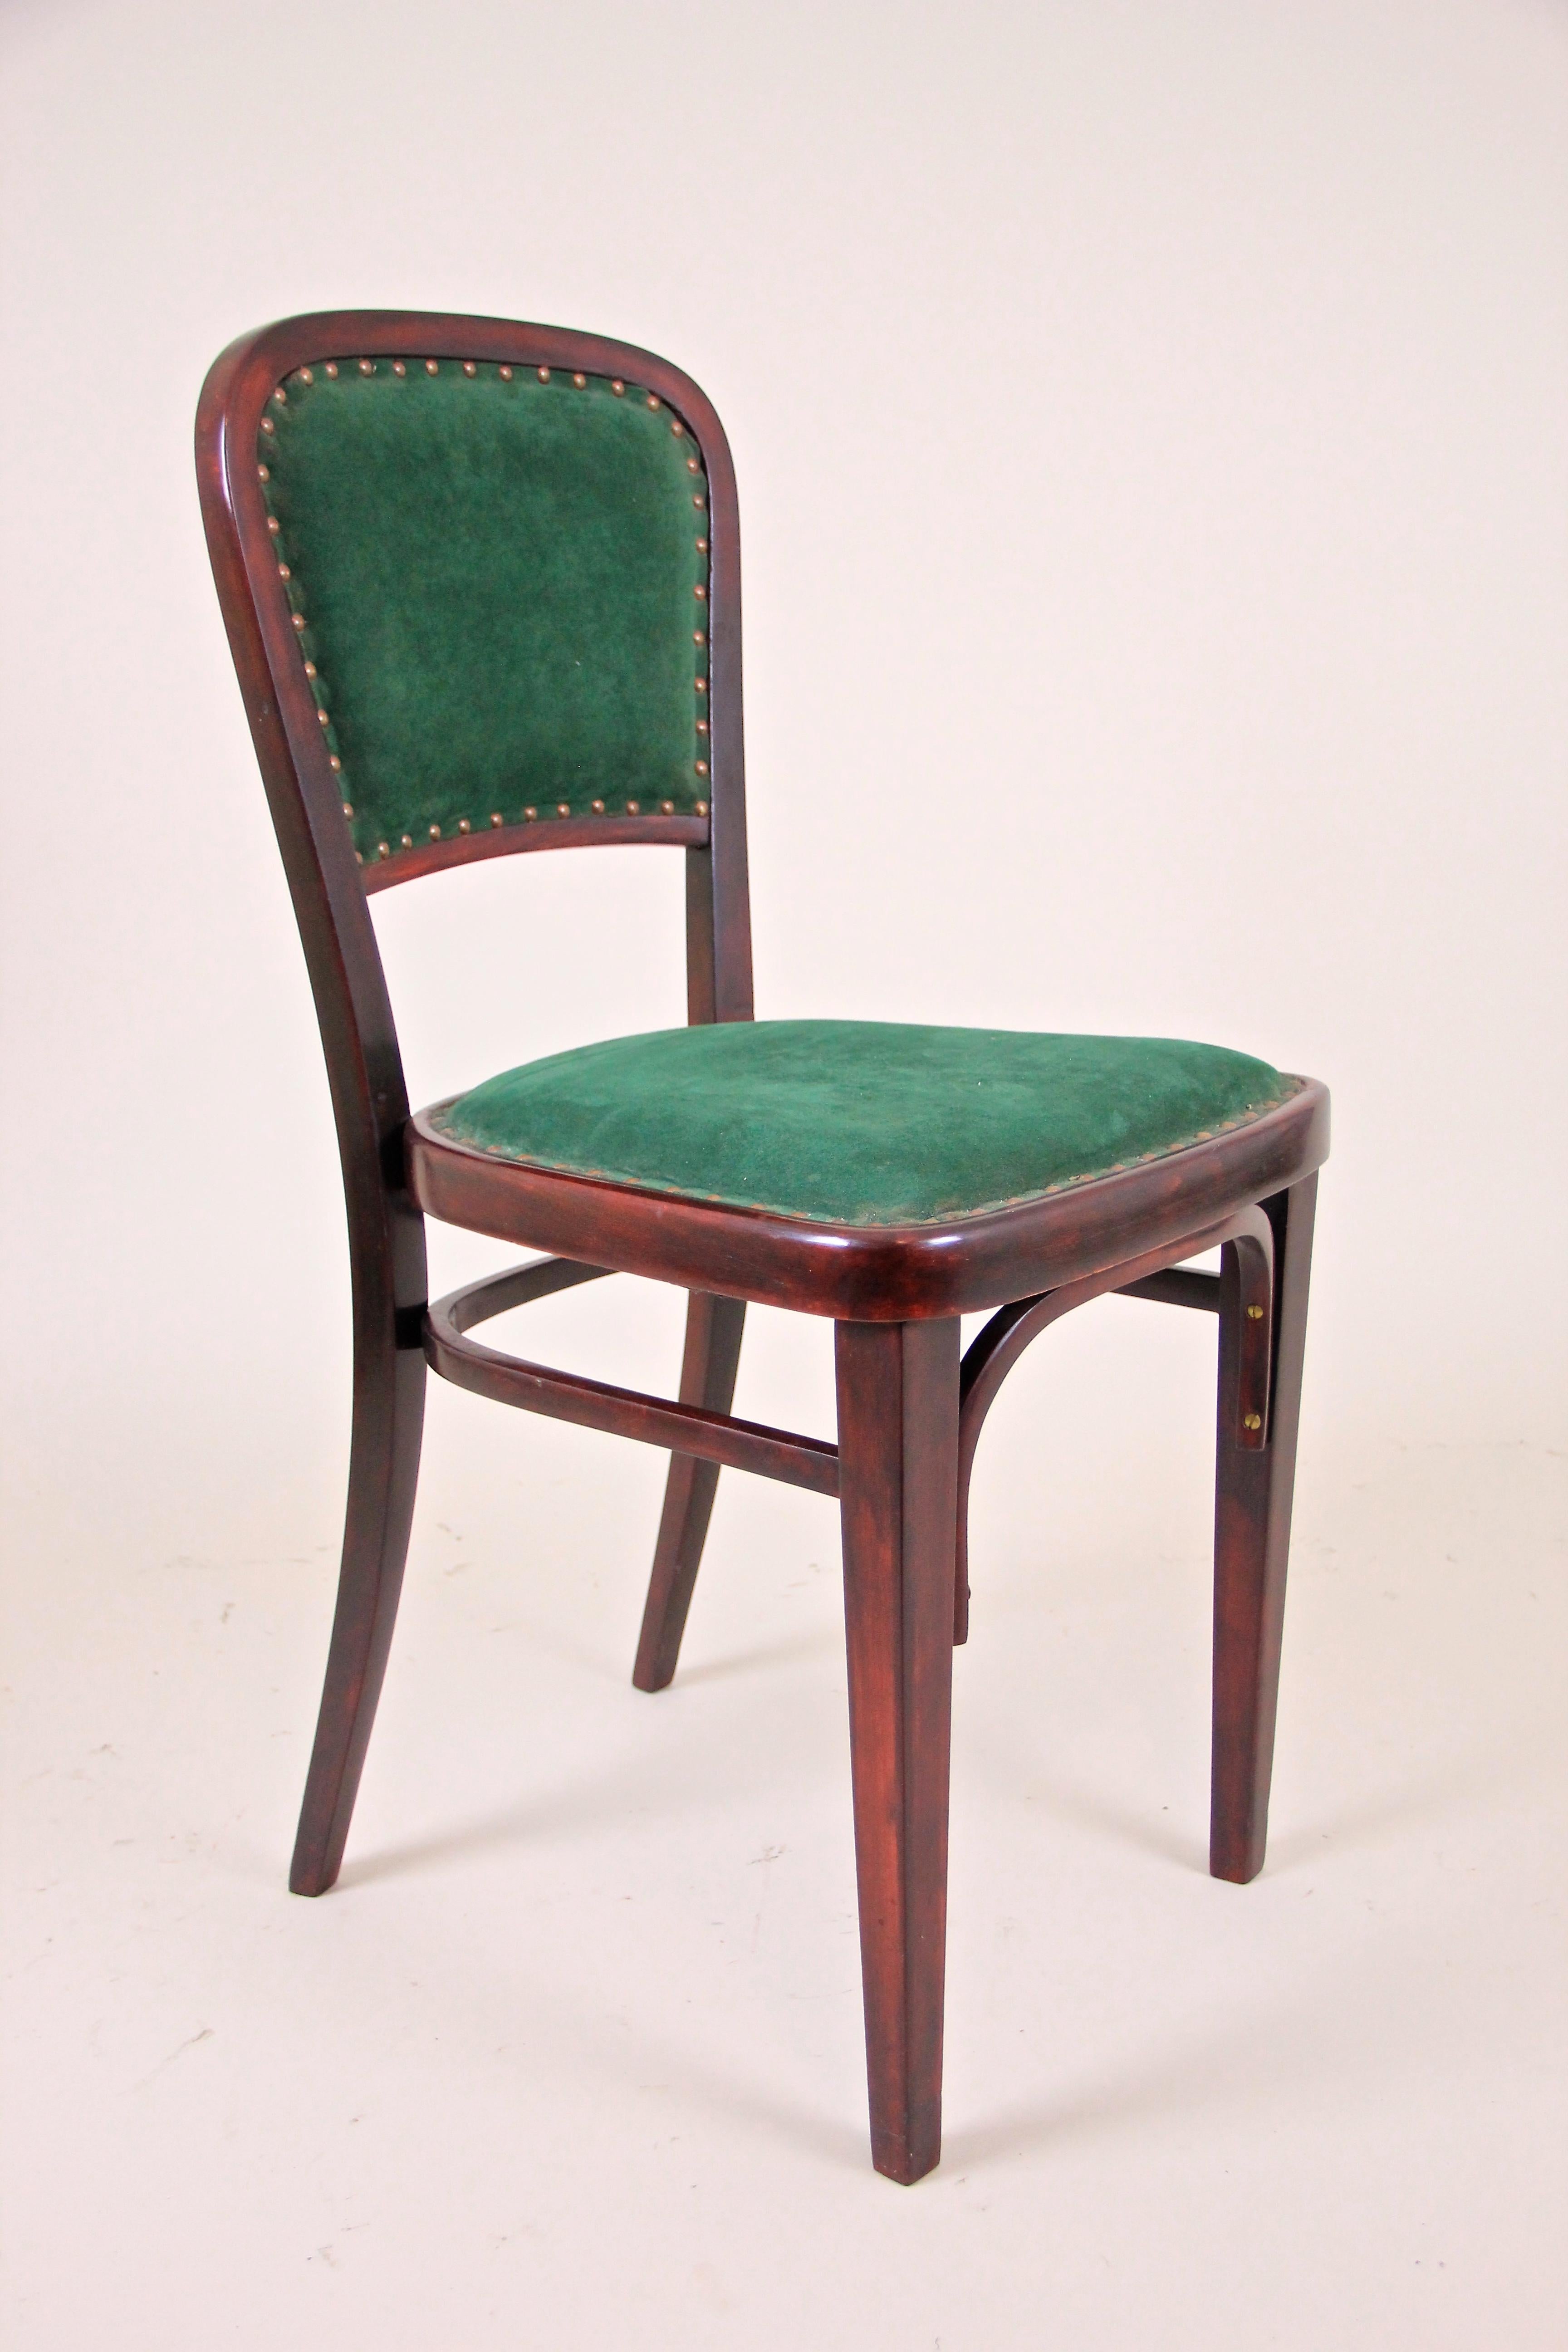 Fantastic set of four Thonet chairs from the Art Nouveau period around 1910 in Austria. These unique chairs were designed by none other than the famous austrian architect Marcel Kammerer for Thonet. Made of Fine bentwood and trimmed to a beautiful